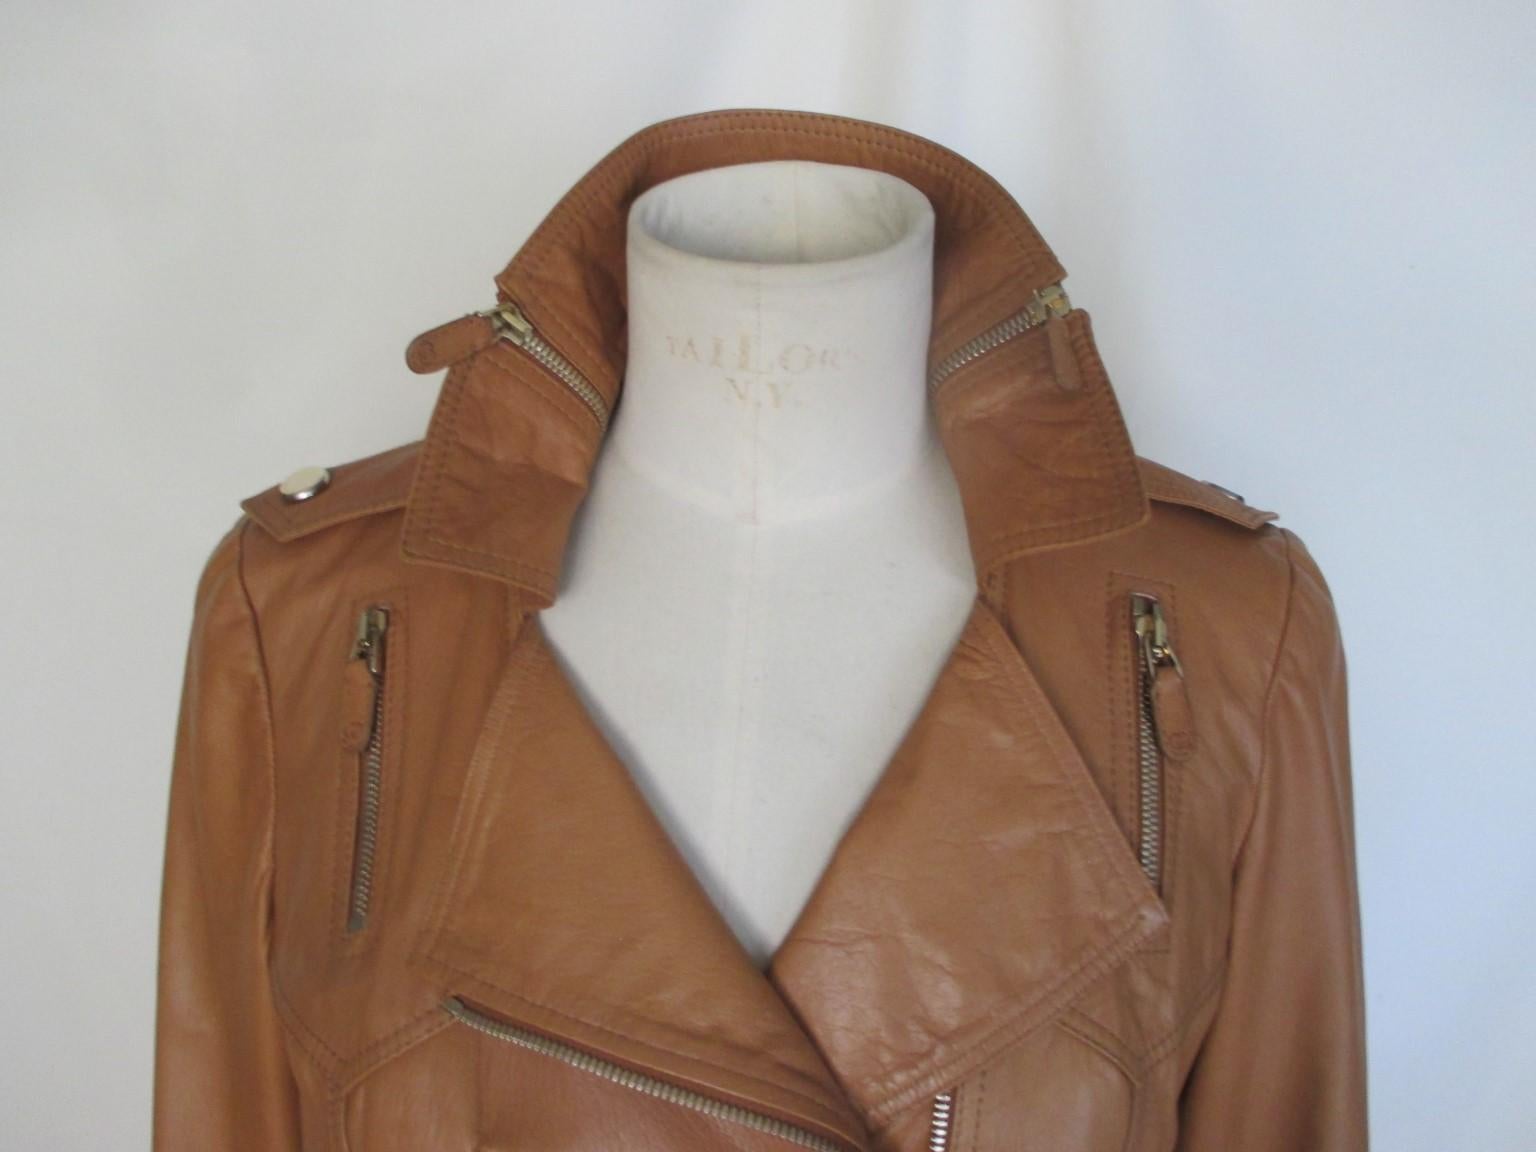 This Gucci mustard brown leather jacket is designed with a lot of zippers

We offer more Gucci, Hermes and exclusive Fur items, view our frontstore.

Details:
Made of brown quality leather, 
With a closing zipper, attached belt, 2 side zipper with 2